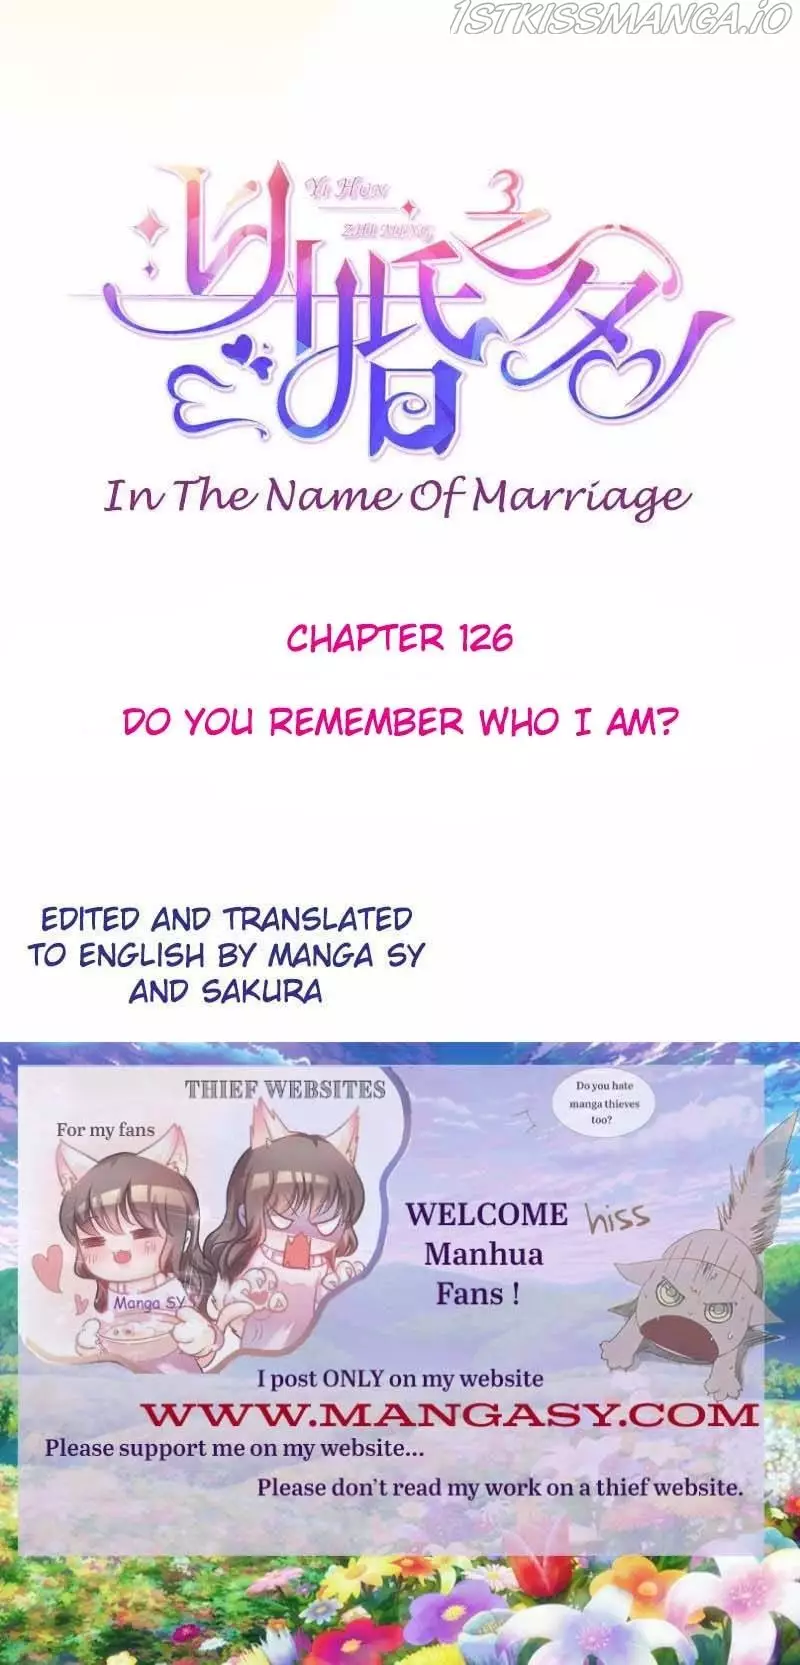 In The Name Of Marriage - 126 page 1-e0abb9b7